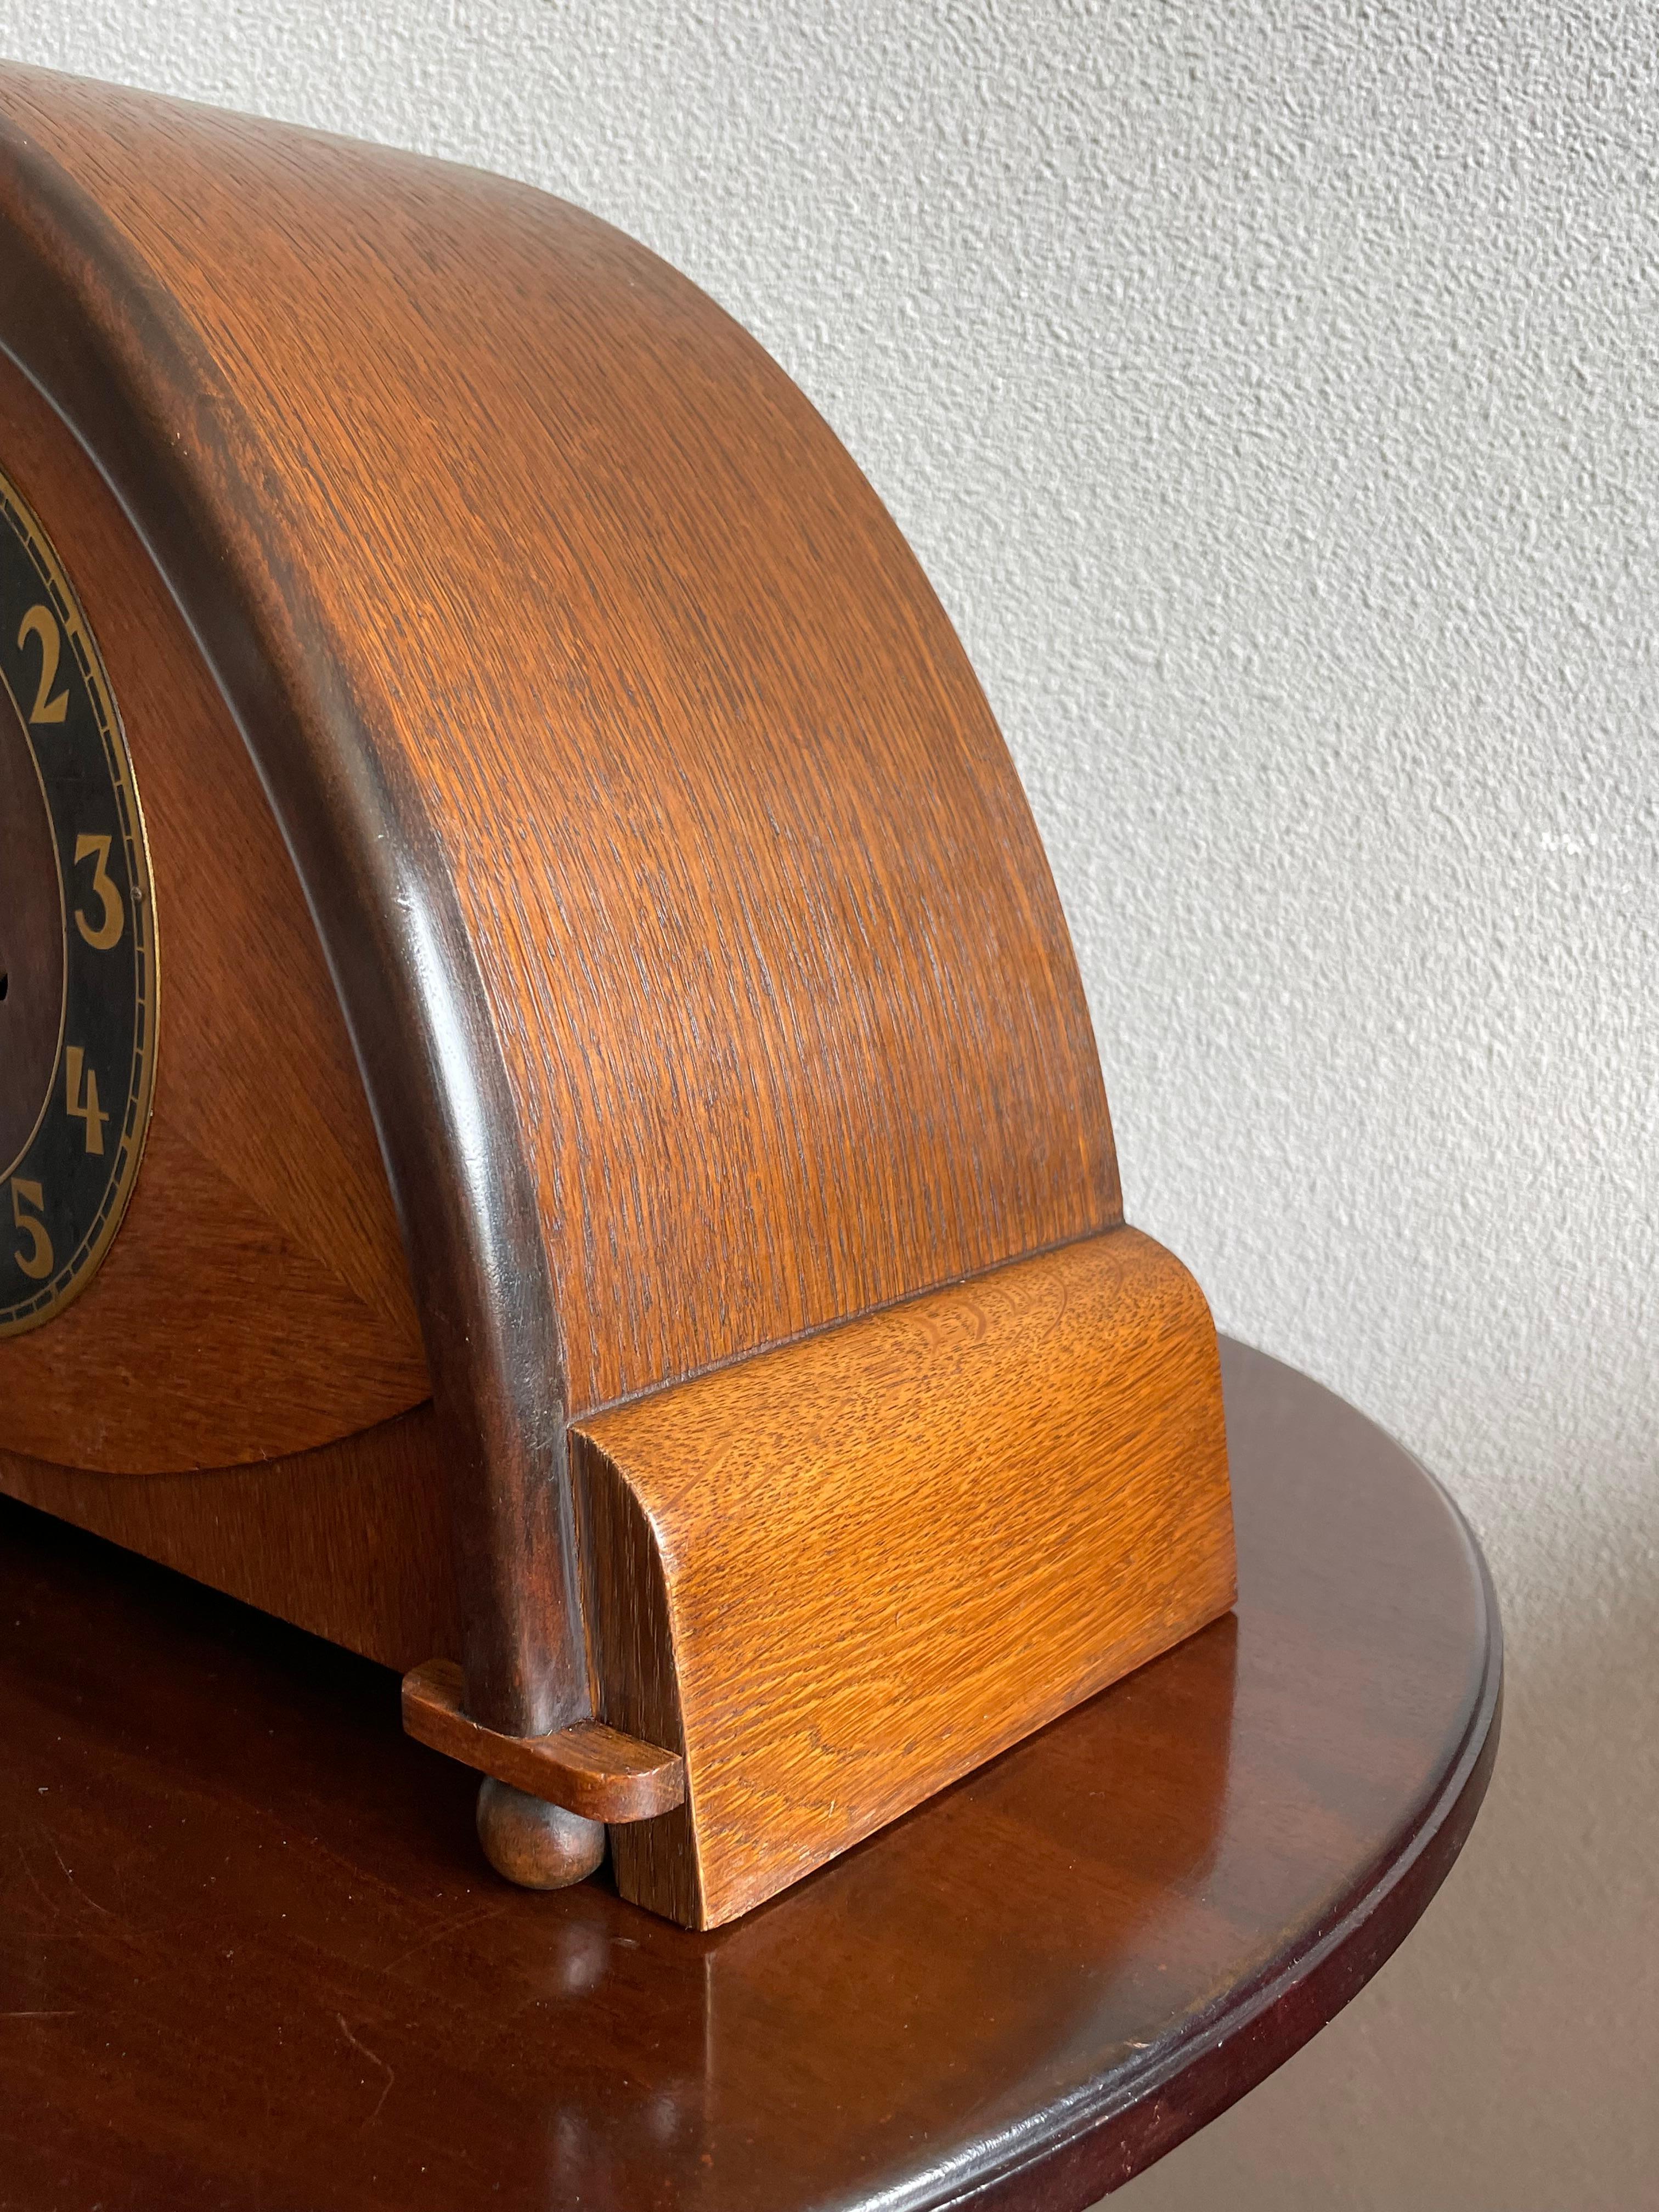 Dutch Arts & Crafts Wooden Mantle or Desk Clock w. Stunning Brass Dial Face 1915 For Sale 7